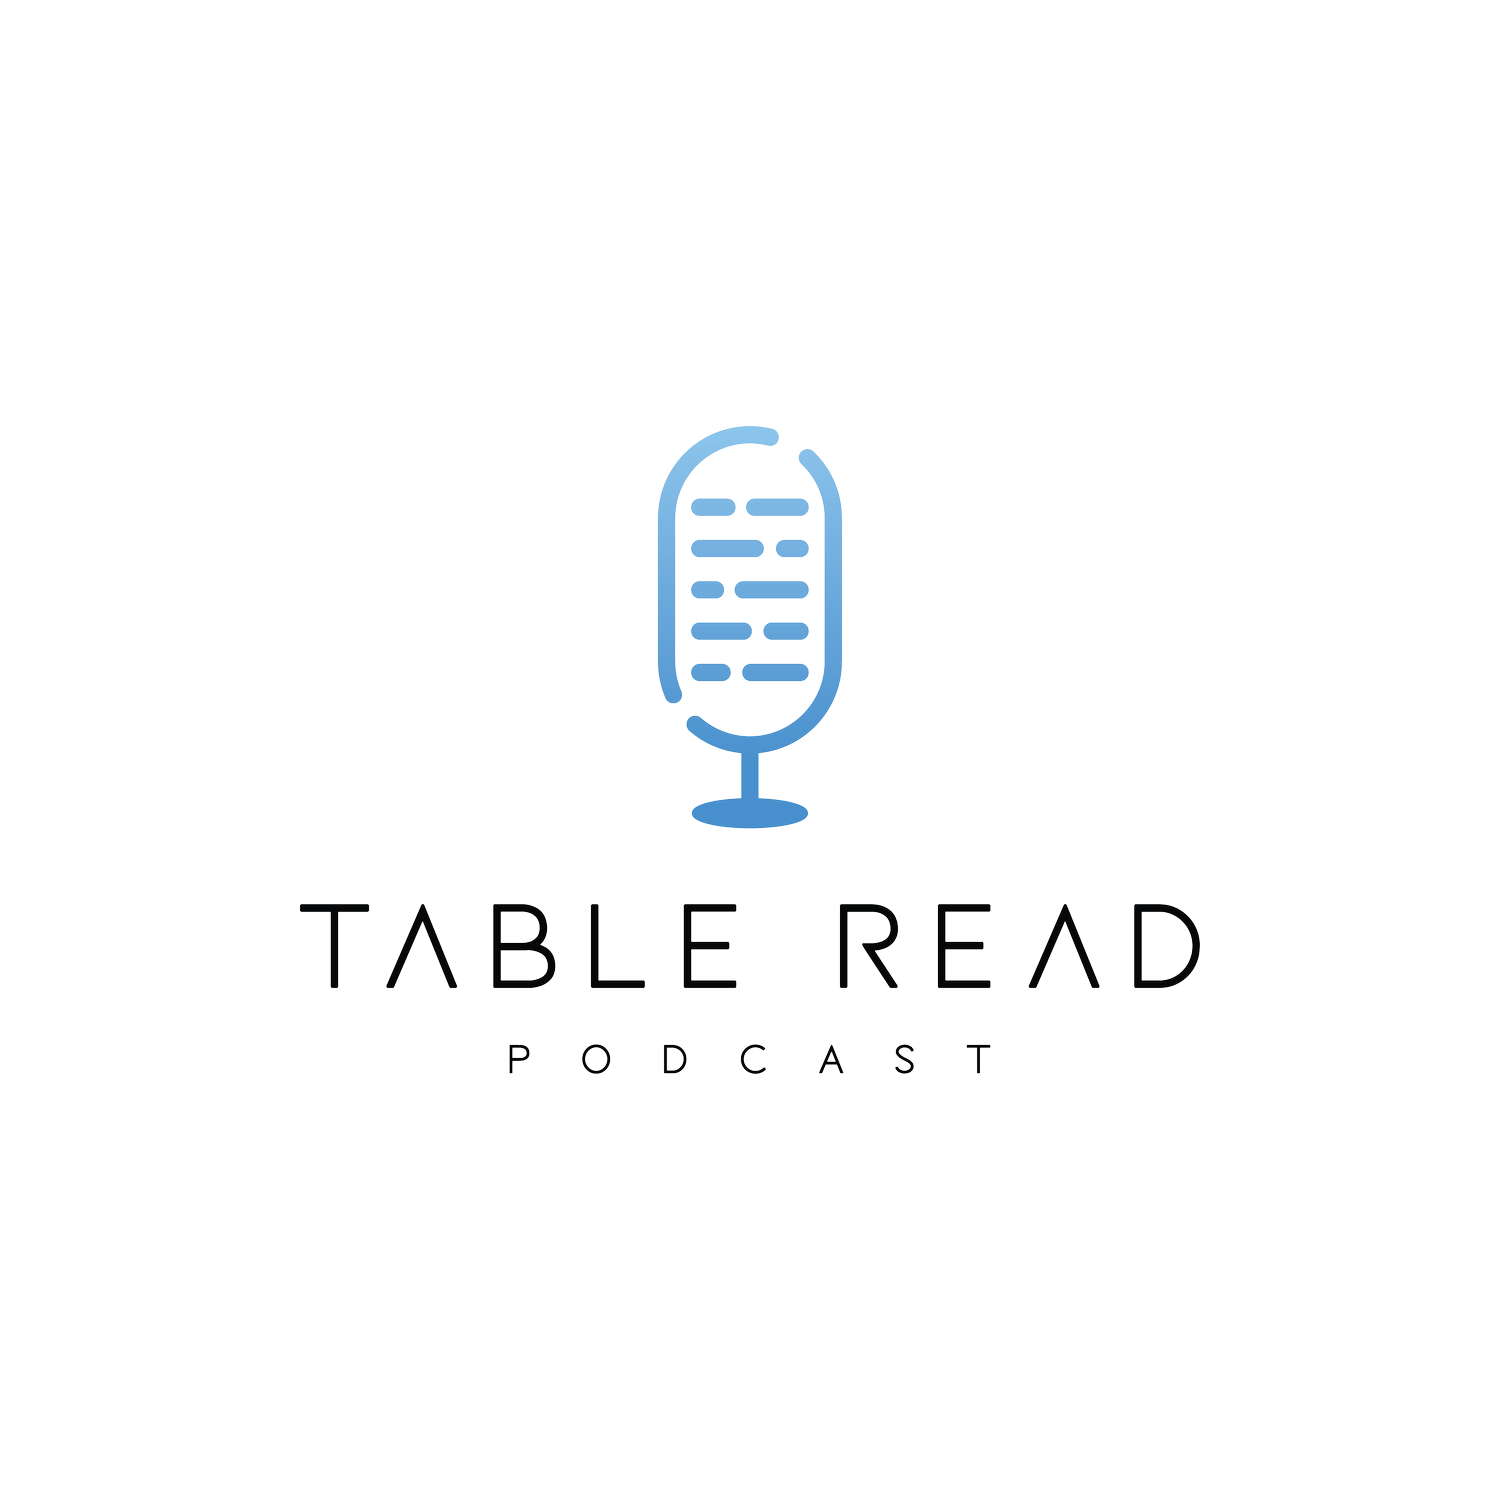 Table Reads Podcast